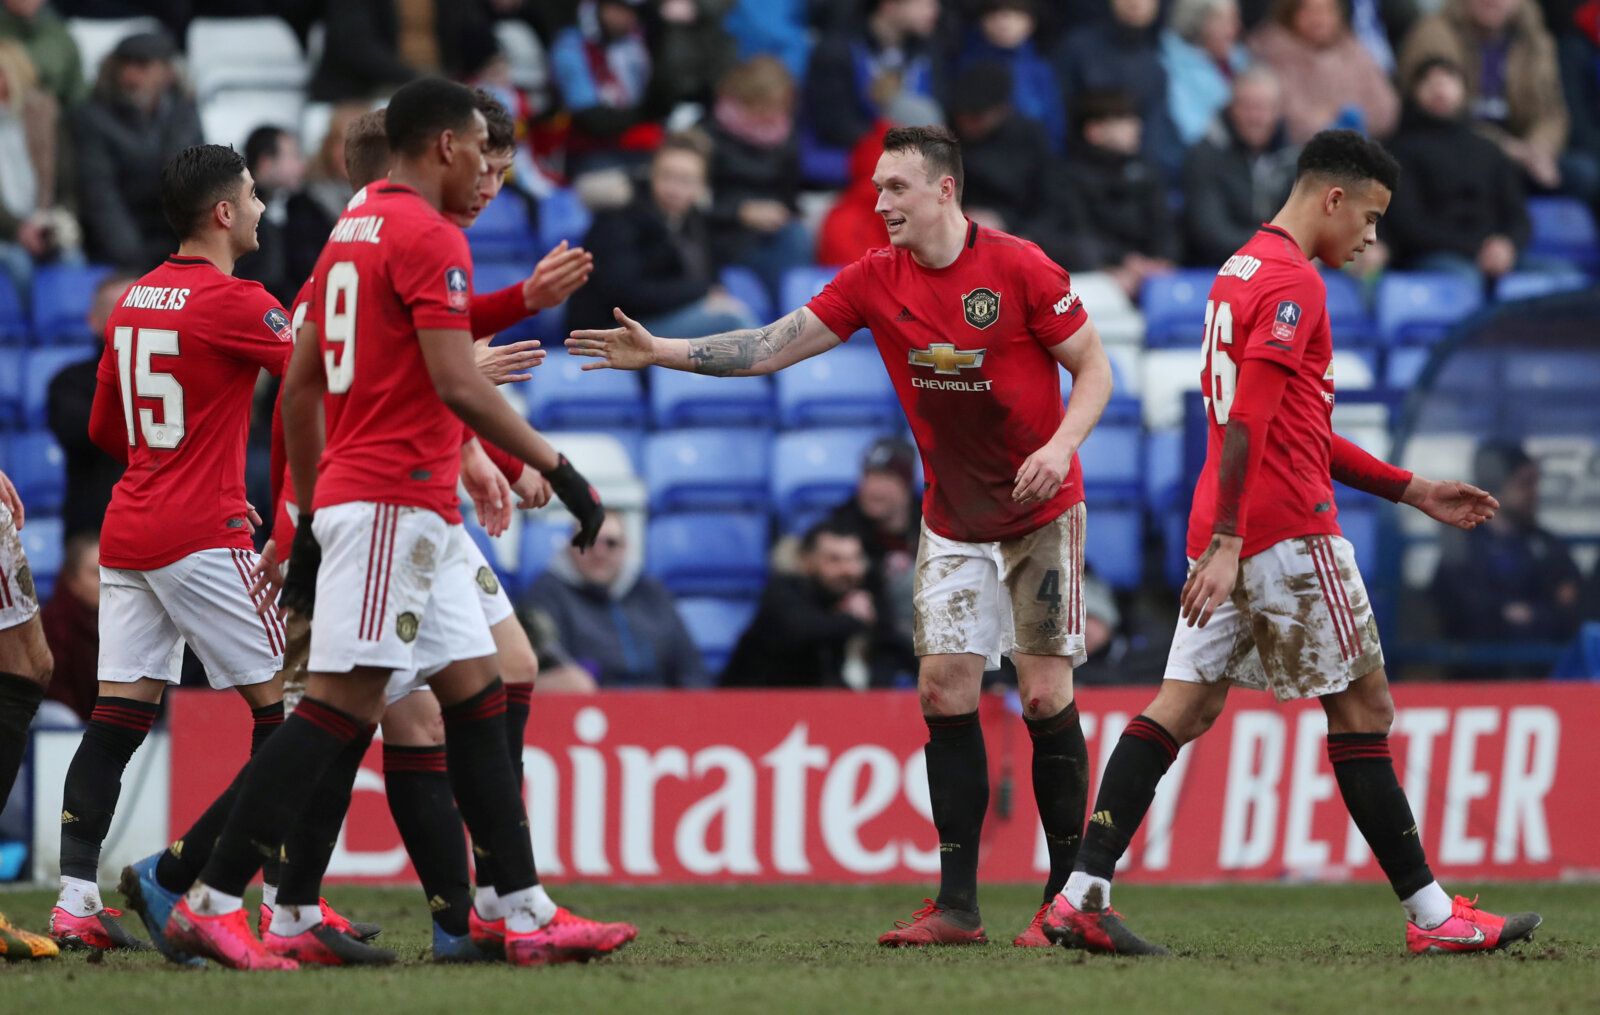 Soccer Football -  FA Cup Fourth Round - Tranmere Rovers v Manchester United - Prenton Park, Birkenhead, Britain - January 26, 2020  Manchester United's Phil Jones celebrates scoring their fourth goal with teammates  REUTERS/Scott Heppell